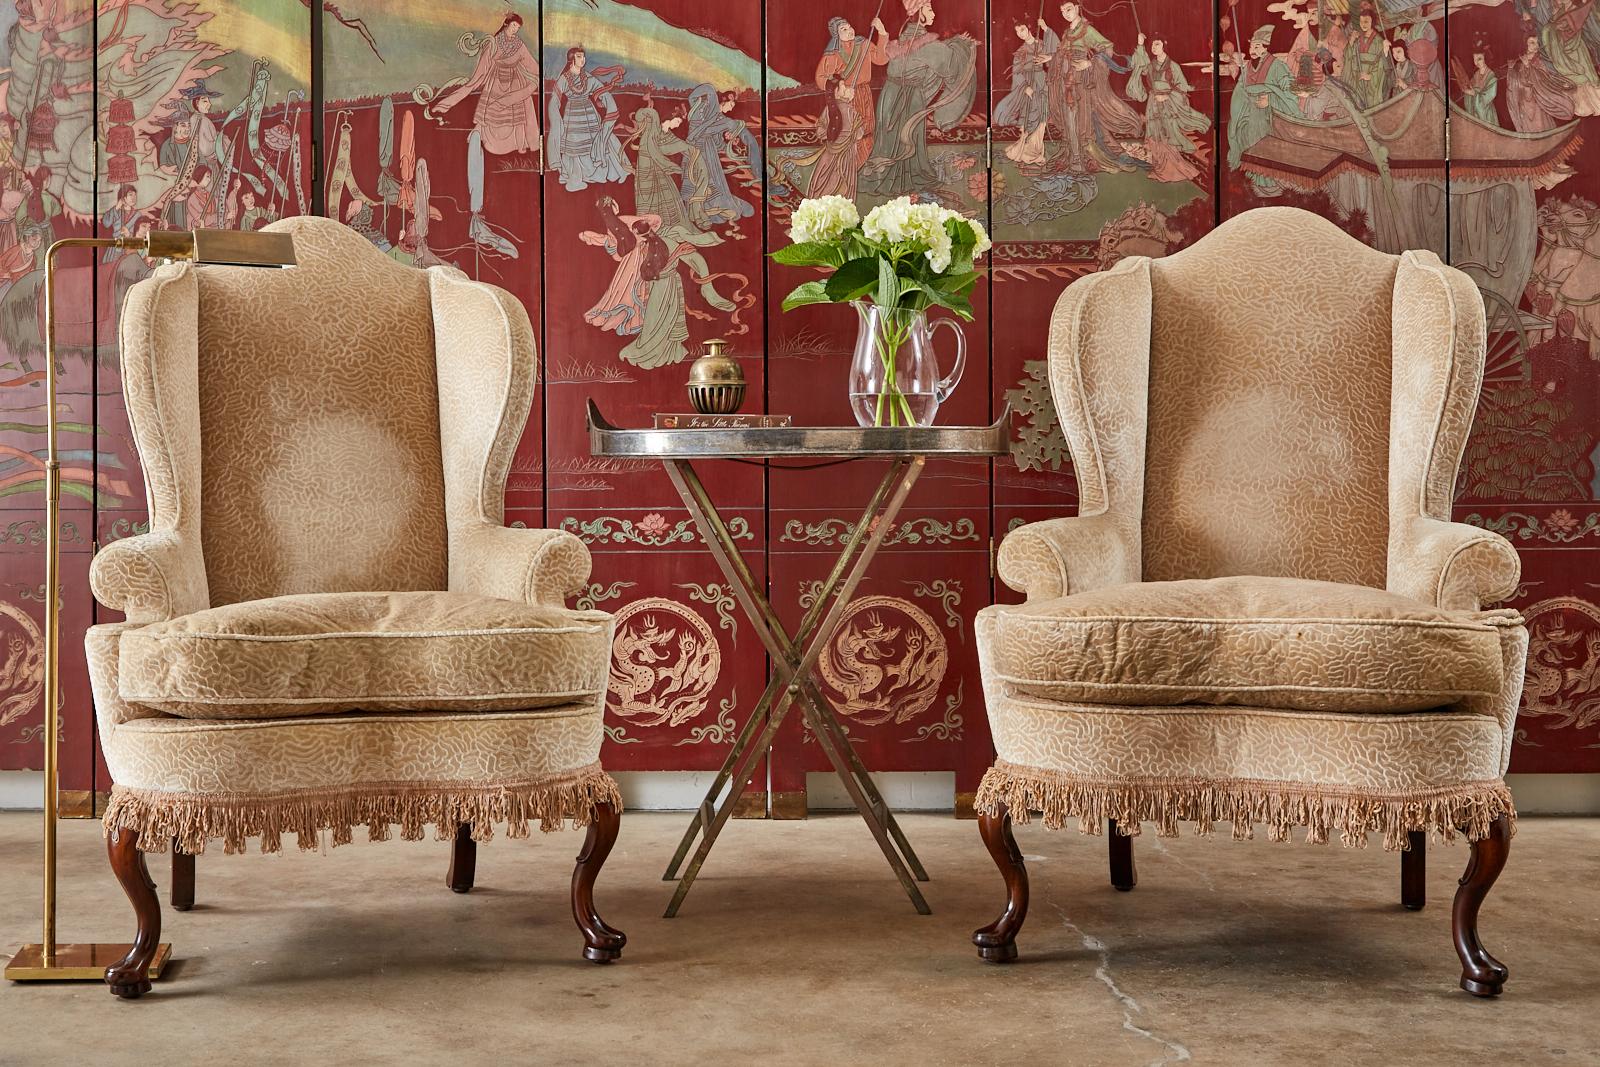 Distinctive pair of upholstered wing chairs by Dunbar. The wingbacks feature a hardwood frame with tall peaked crests and fully developed wings. The chairs are crafted in the Queen Anne taste with cabriole legs in the front ending with pad feet. The